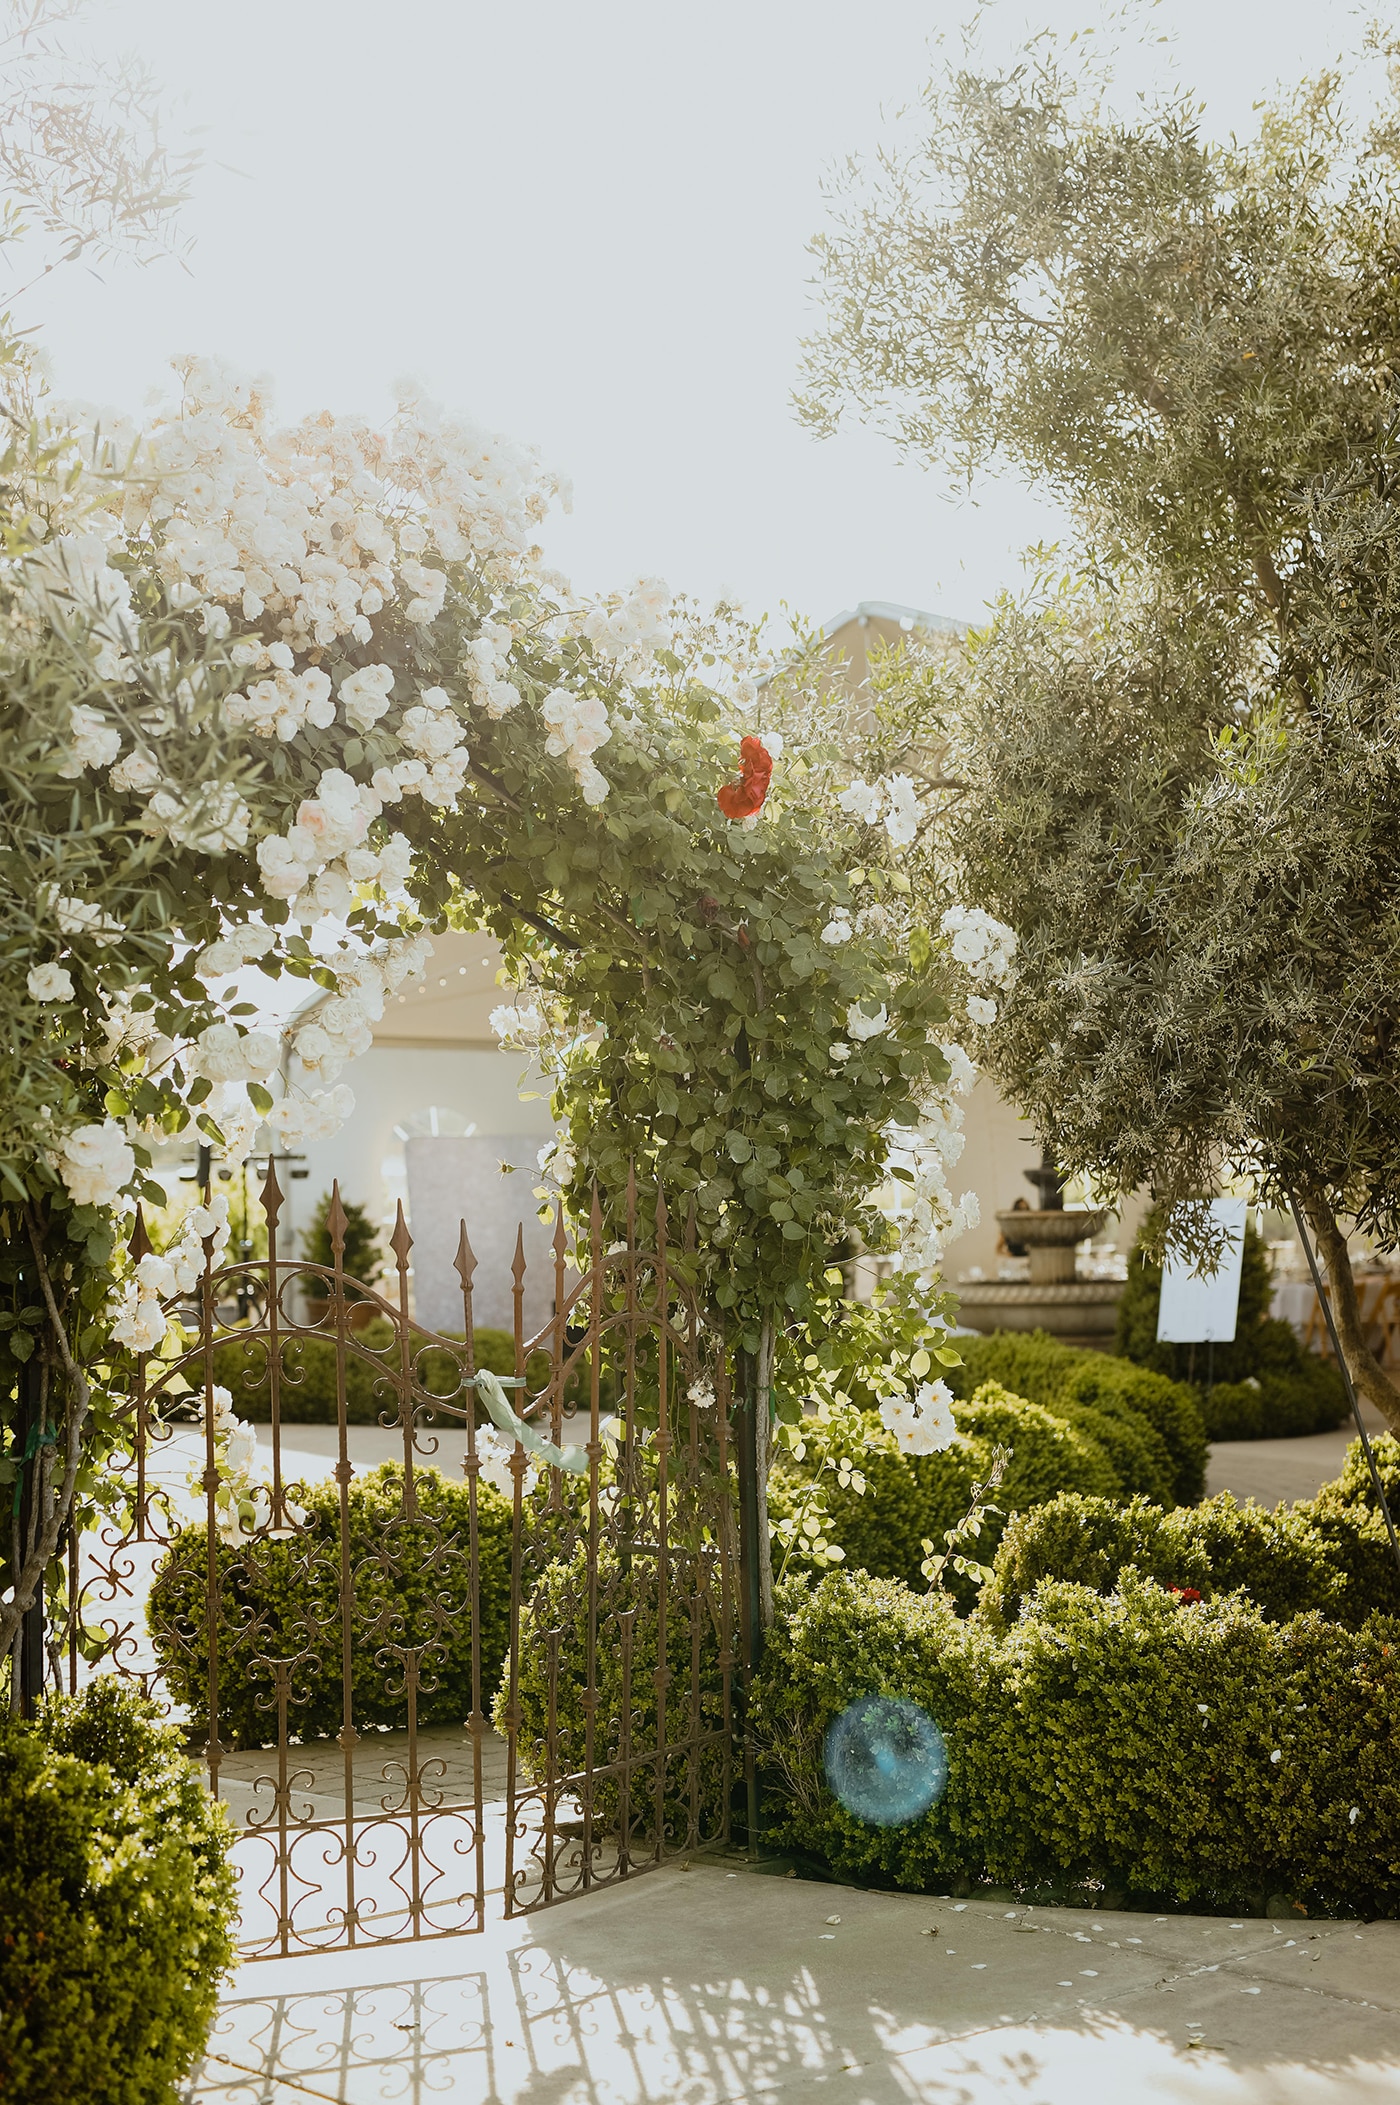 Side angle view of rustic gate and arch covered with white roses in a garden, sun setting through the leaves.